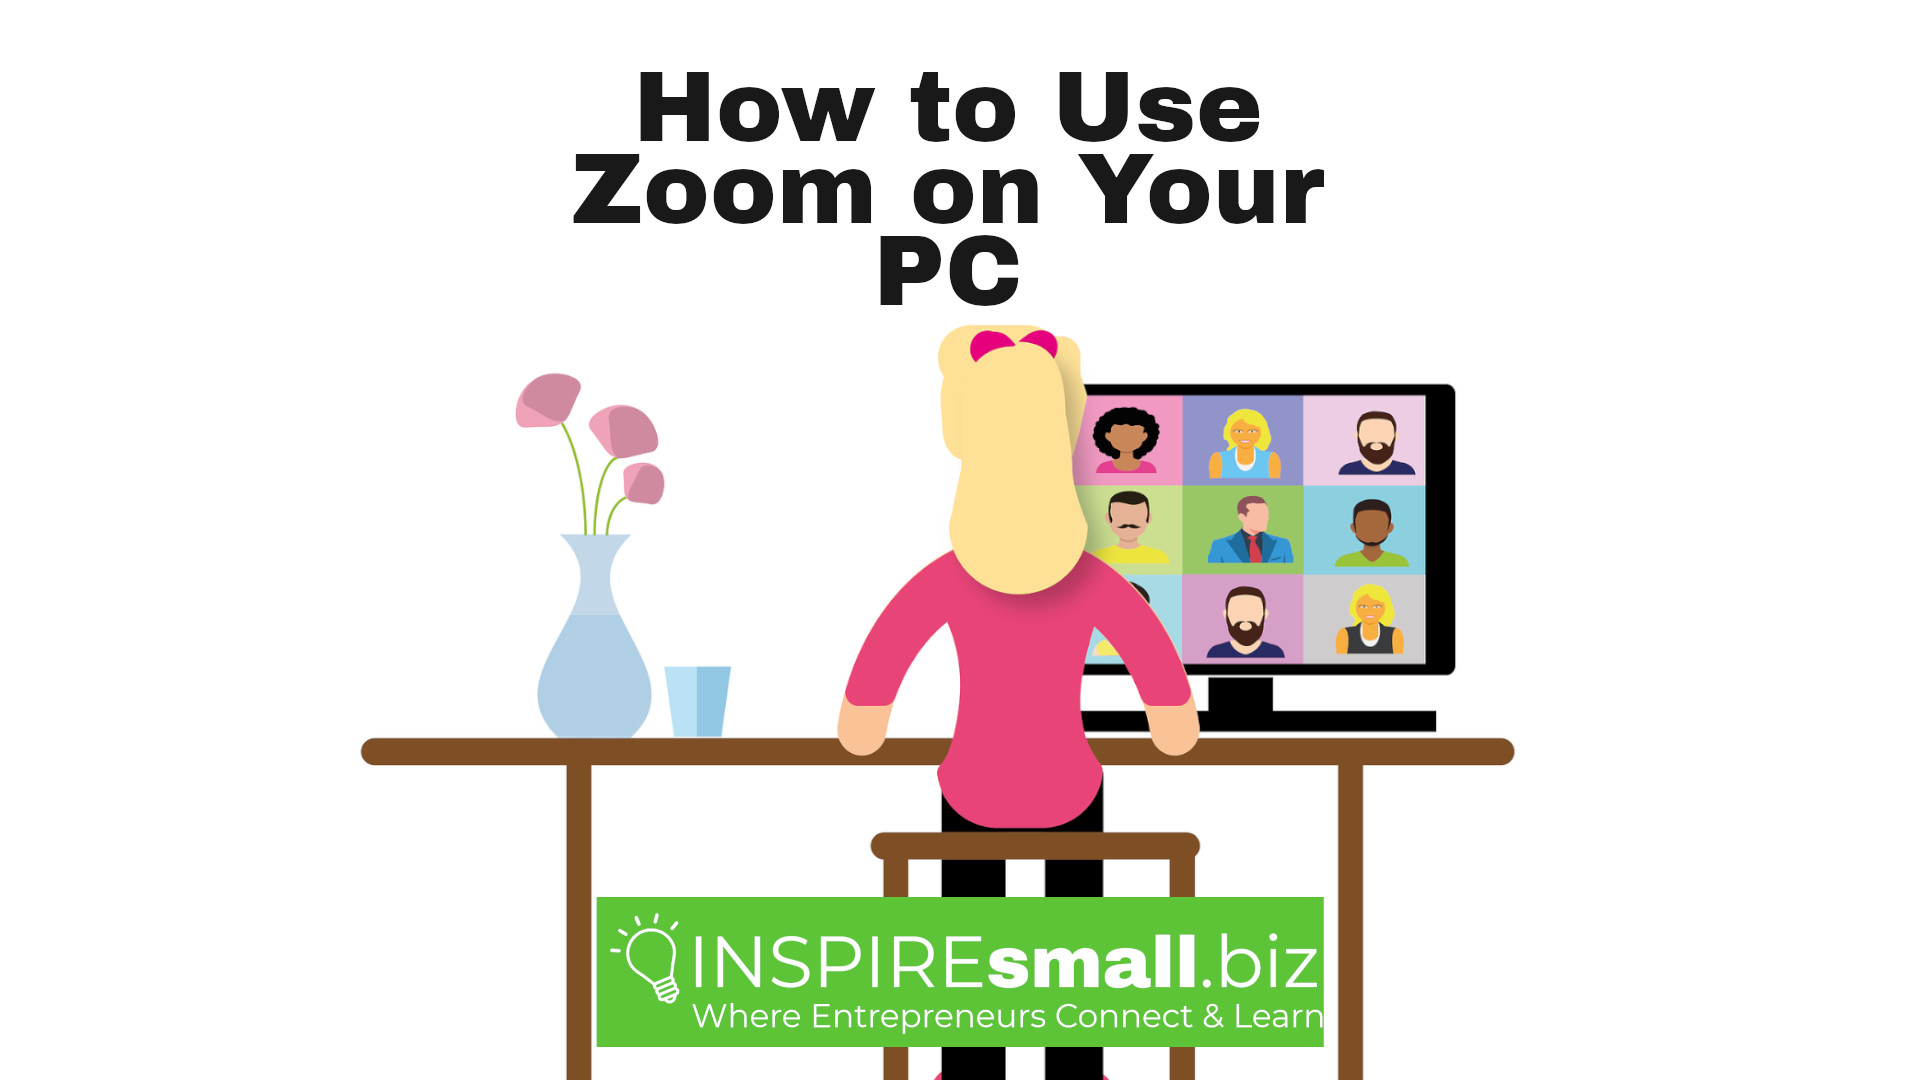 Illustration of woman sitting ad a table watching a virtual meeting on the screen with the text 'How to Use Zoom on Your PC' and the INSPIREsmall.biz logo